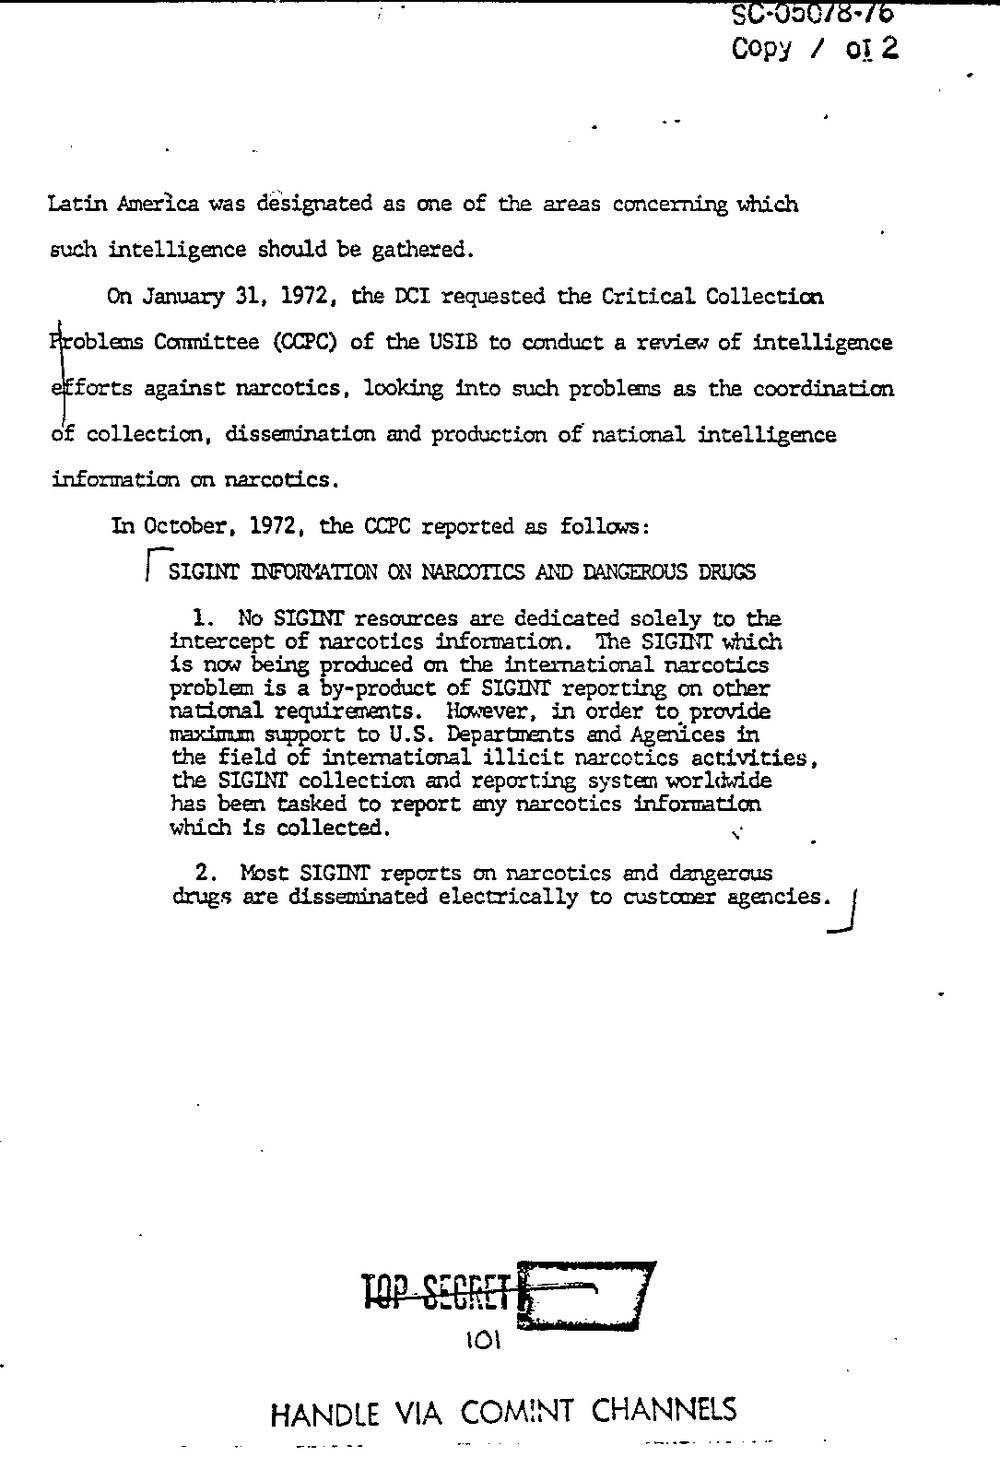 Page 109 from Report on Inquiry Into CIA Related Electronic Surveillance Activities